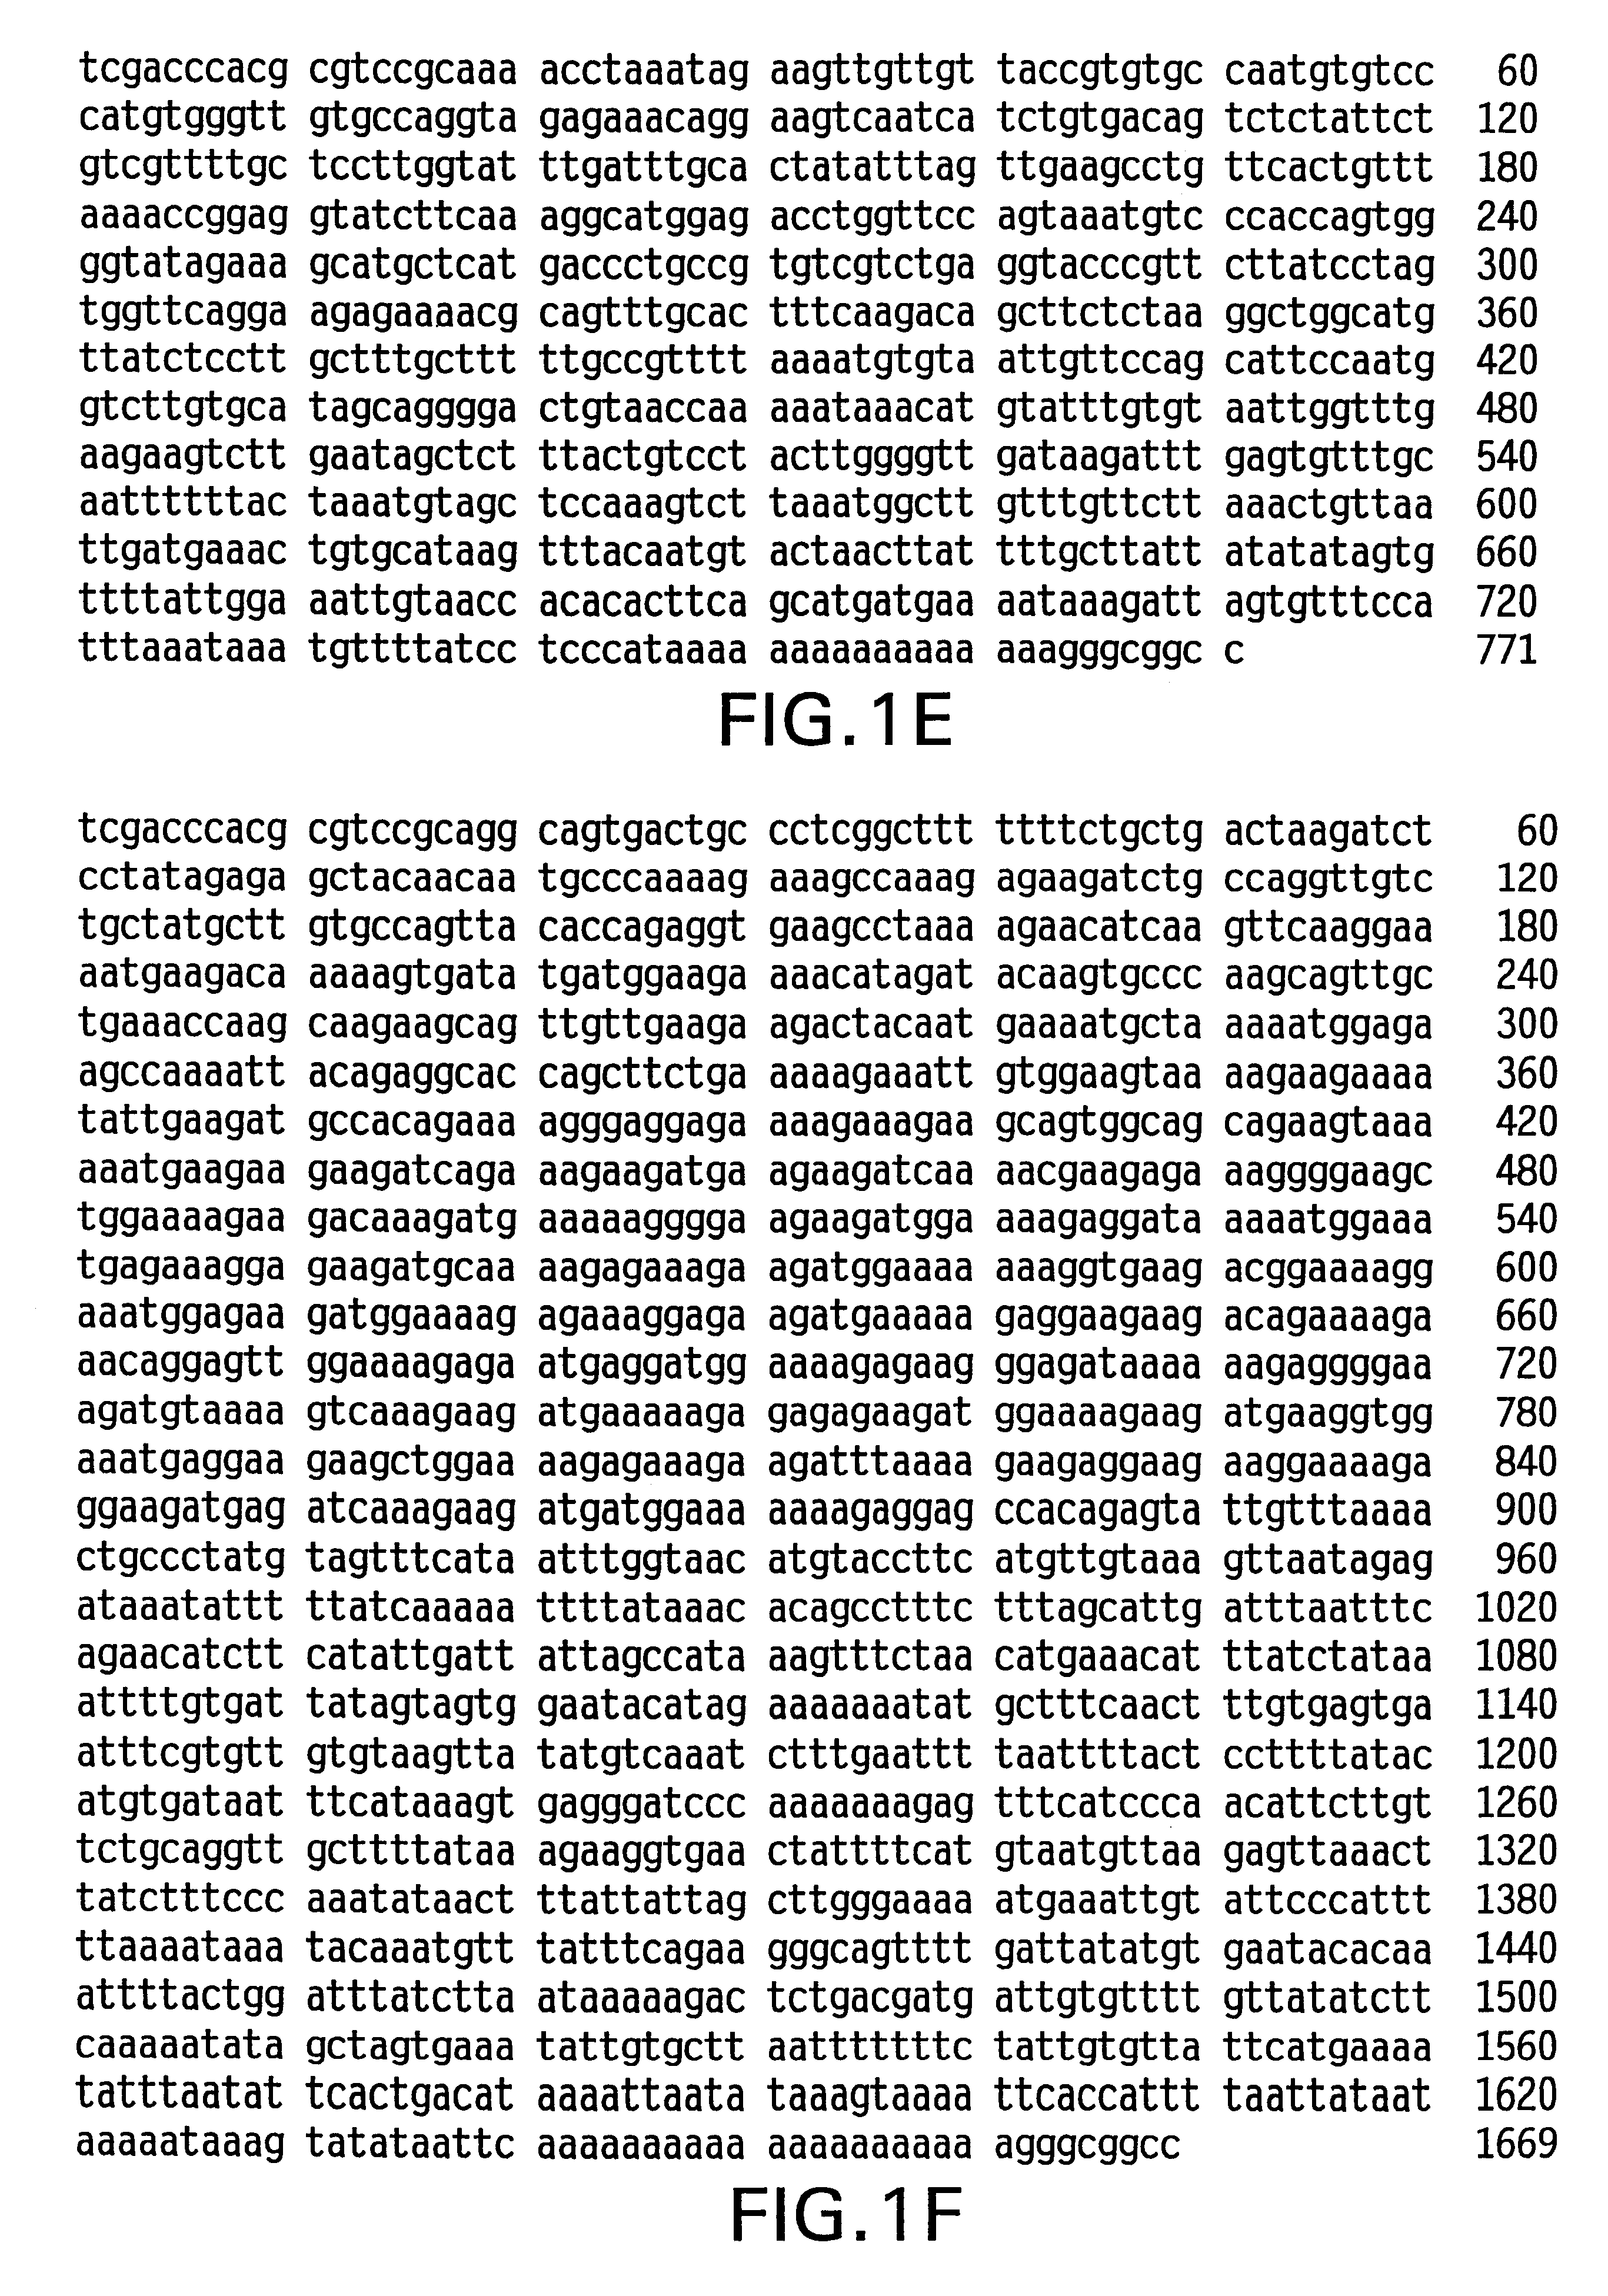 Compositions and methods for diagnosing and treating conditions, disorders, or diseases involving cell death